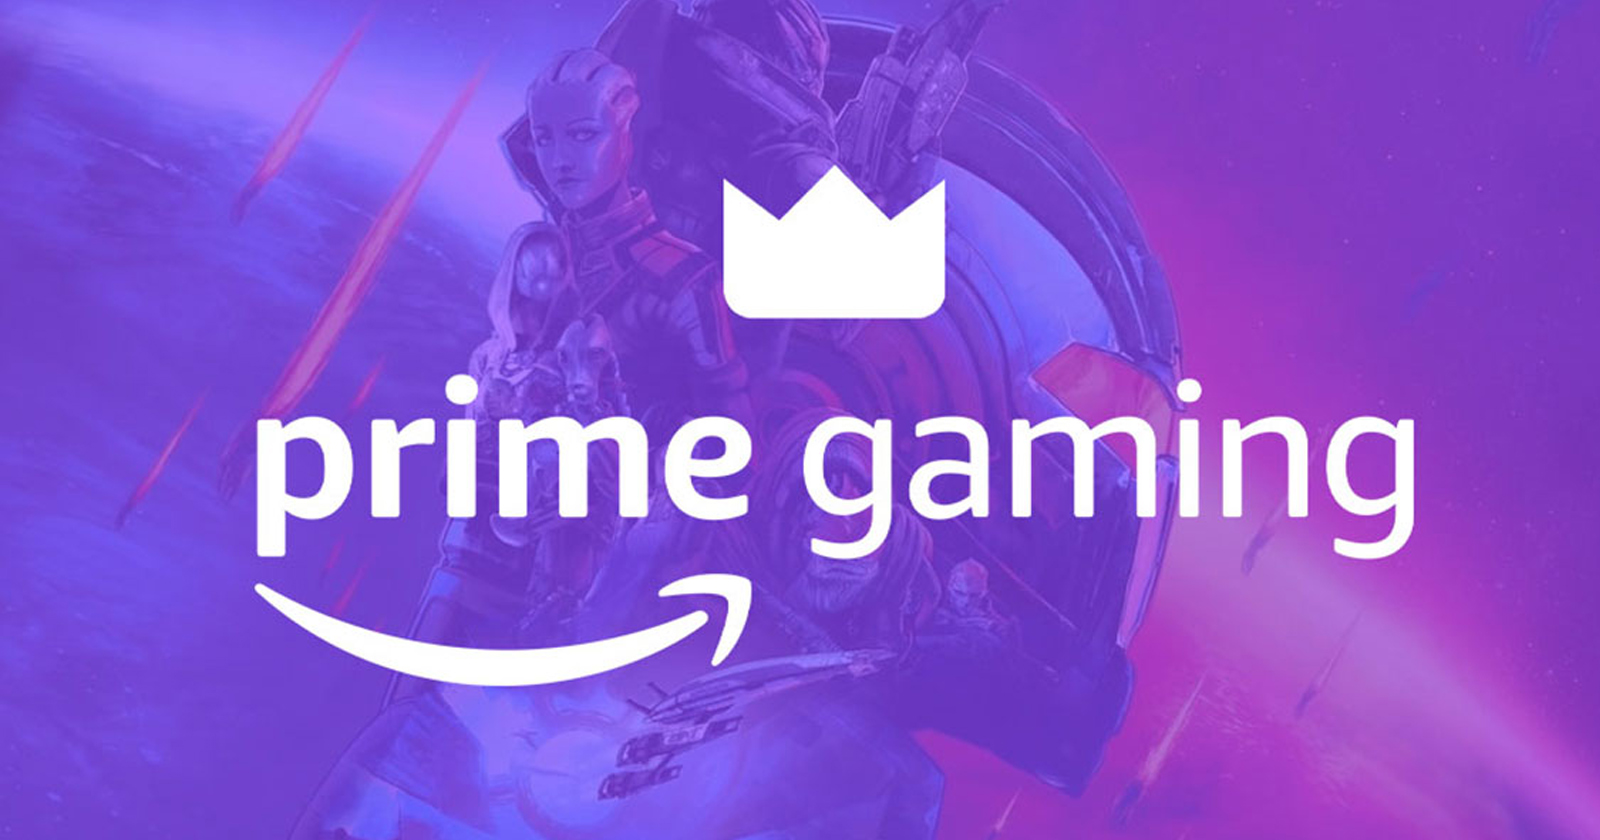 amazon-prime-gaming-free-games-for-may-have-been-announced